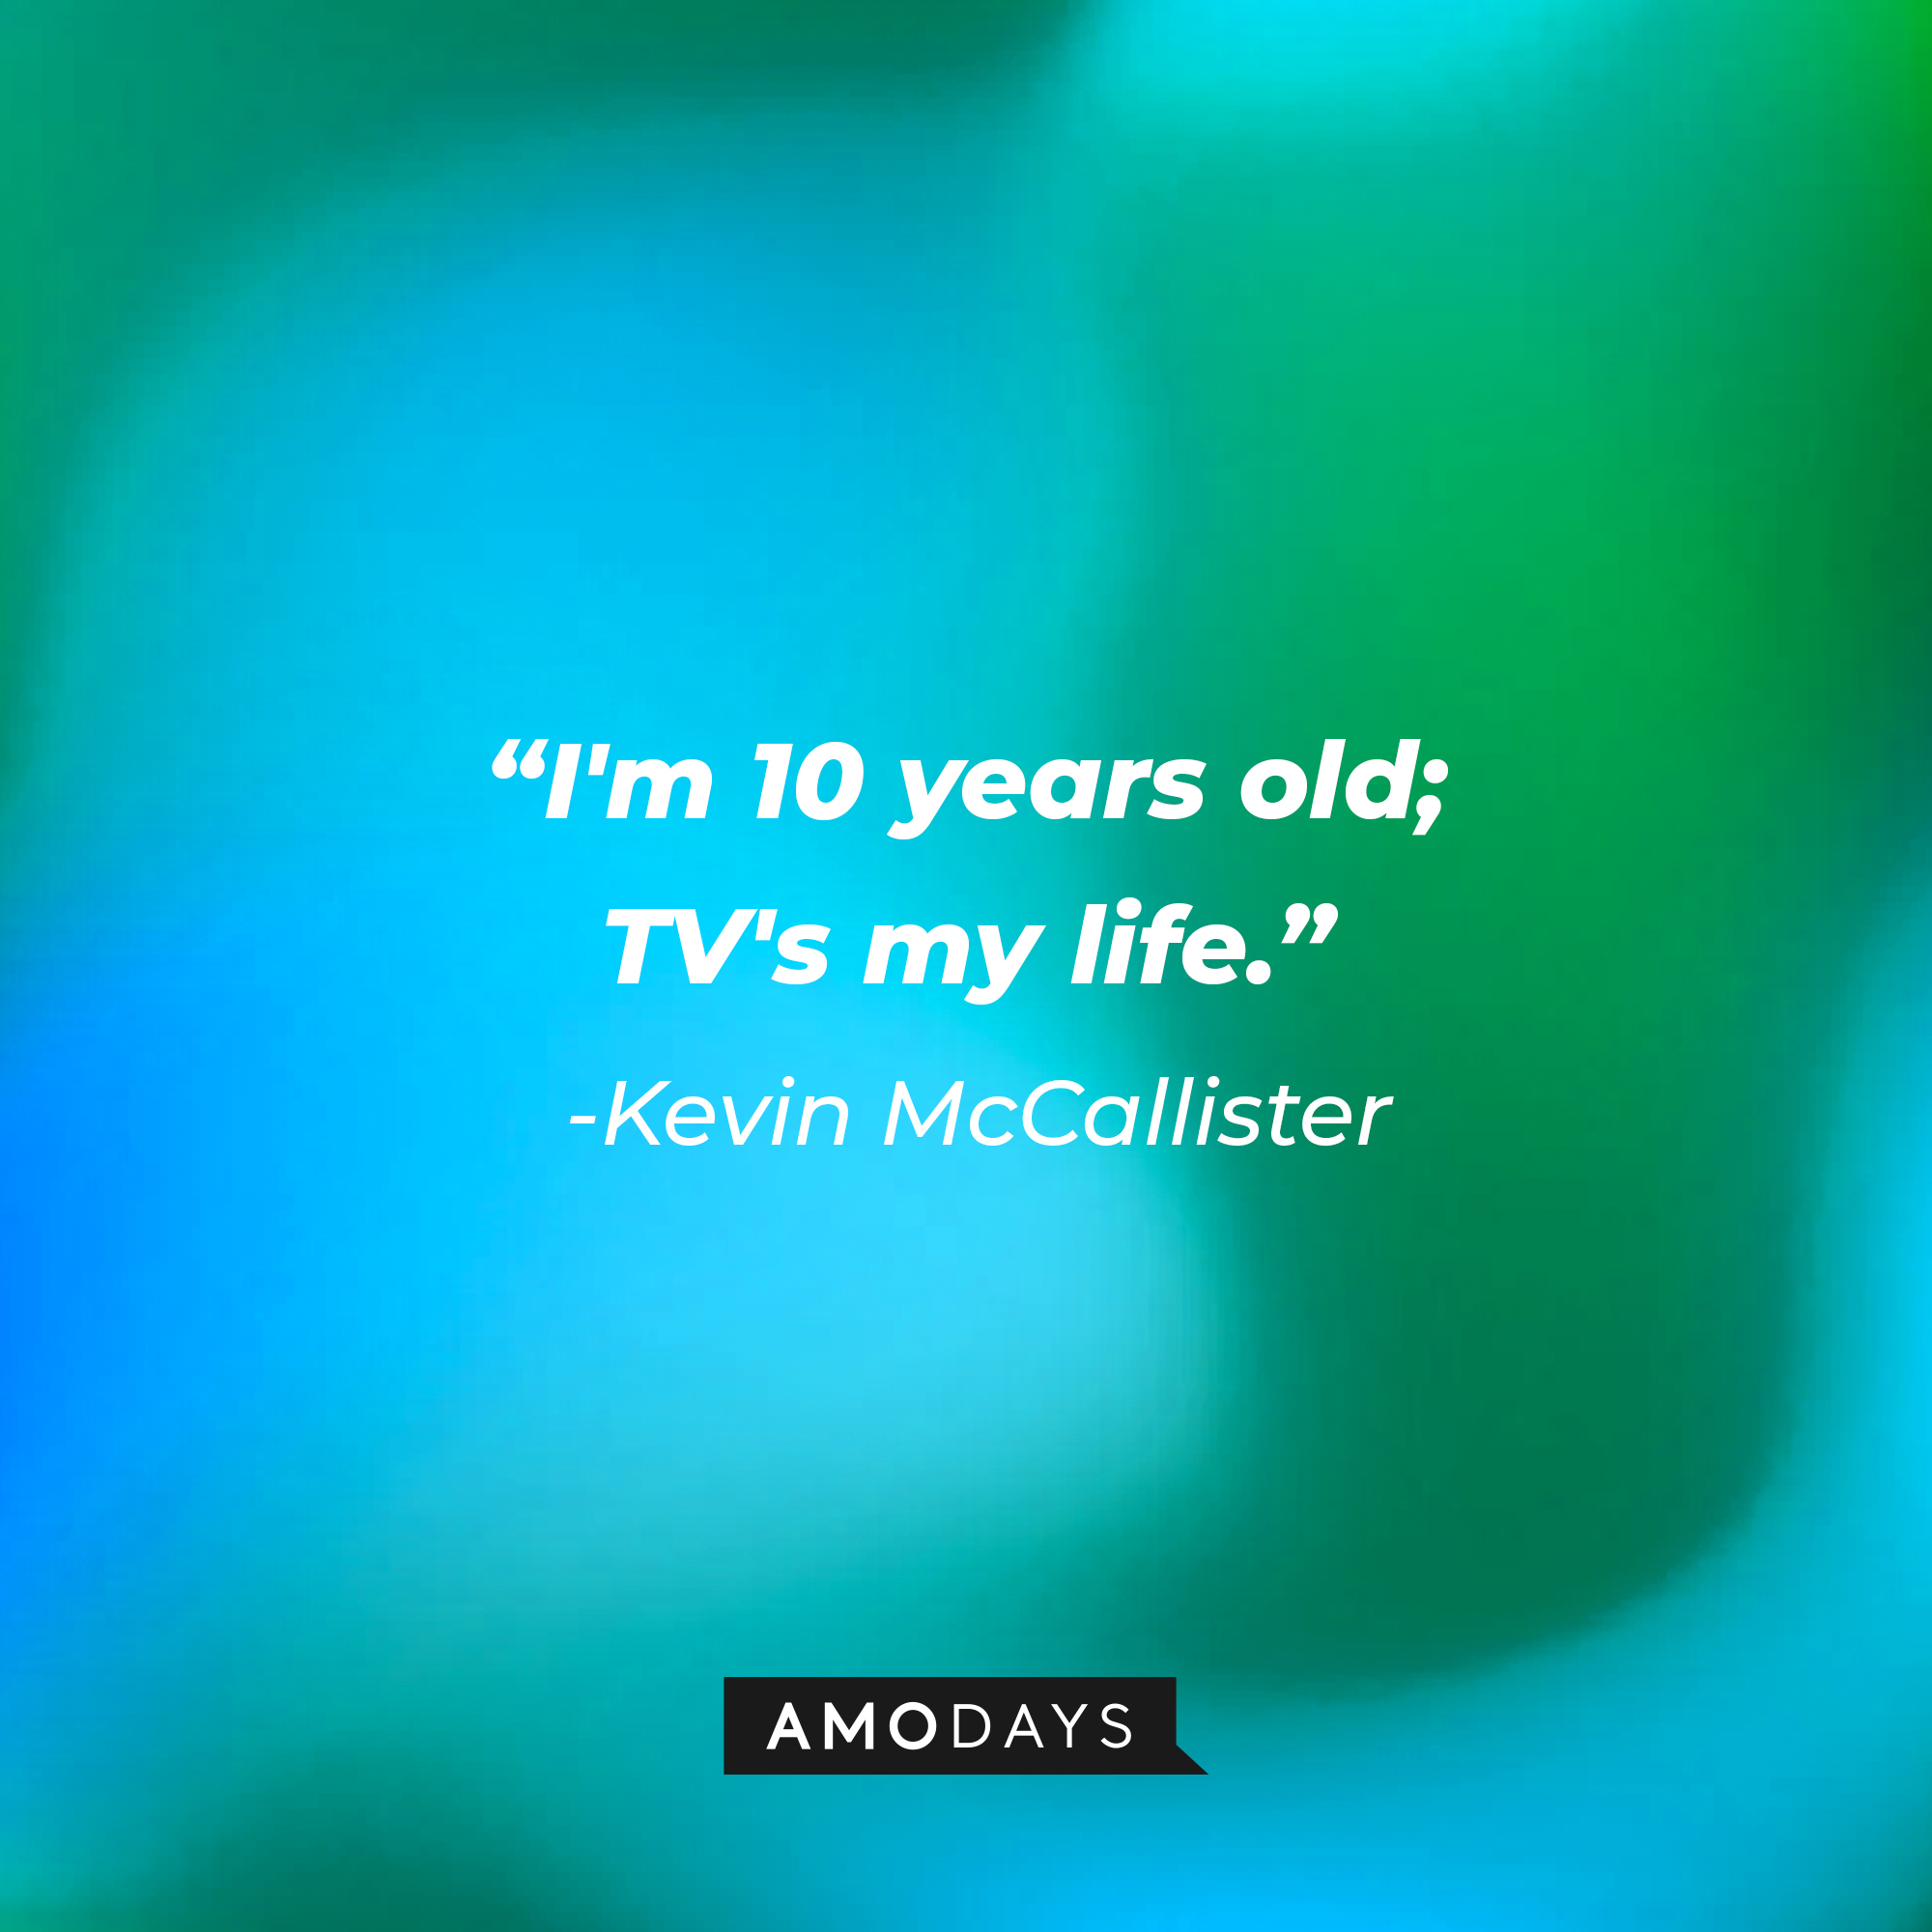 Kevin McCallister's quote: "I'm 10 years old; TV's my life." | Source: AmoDays